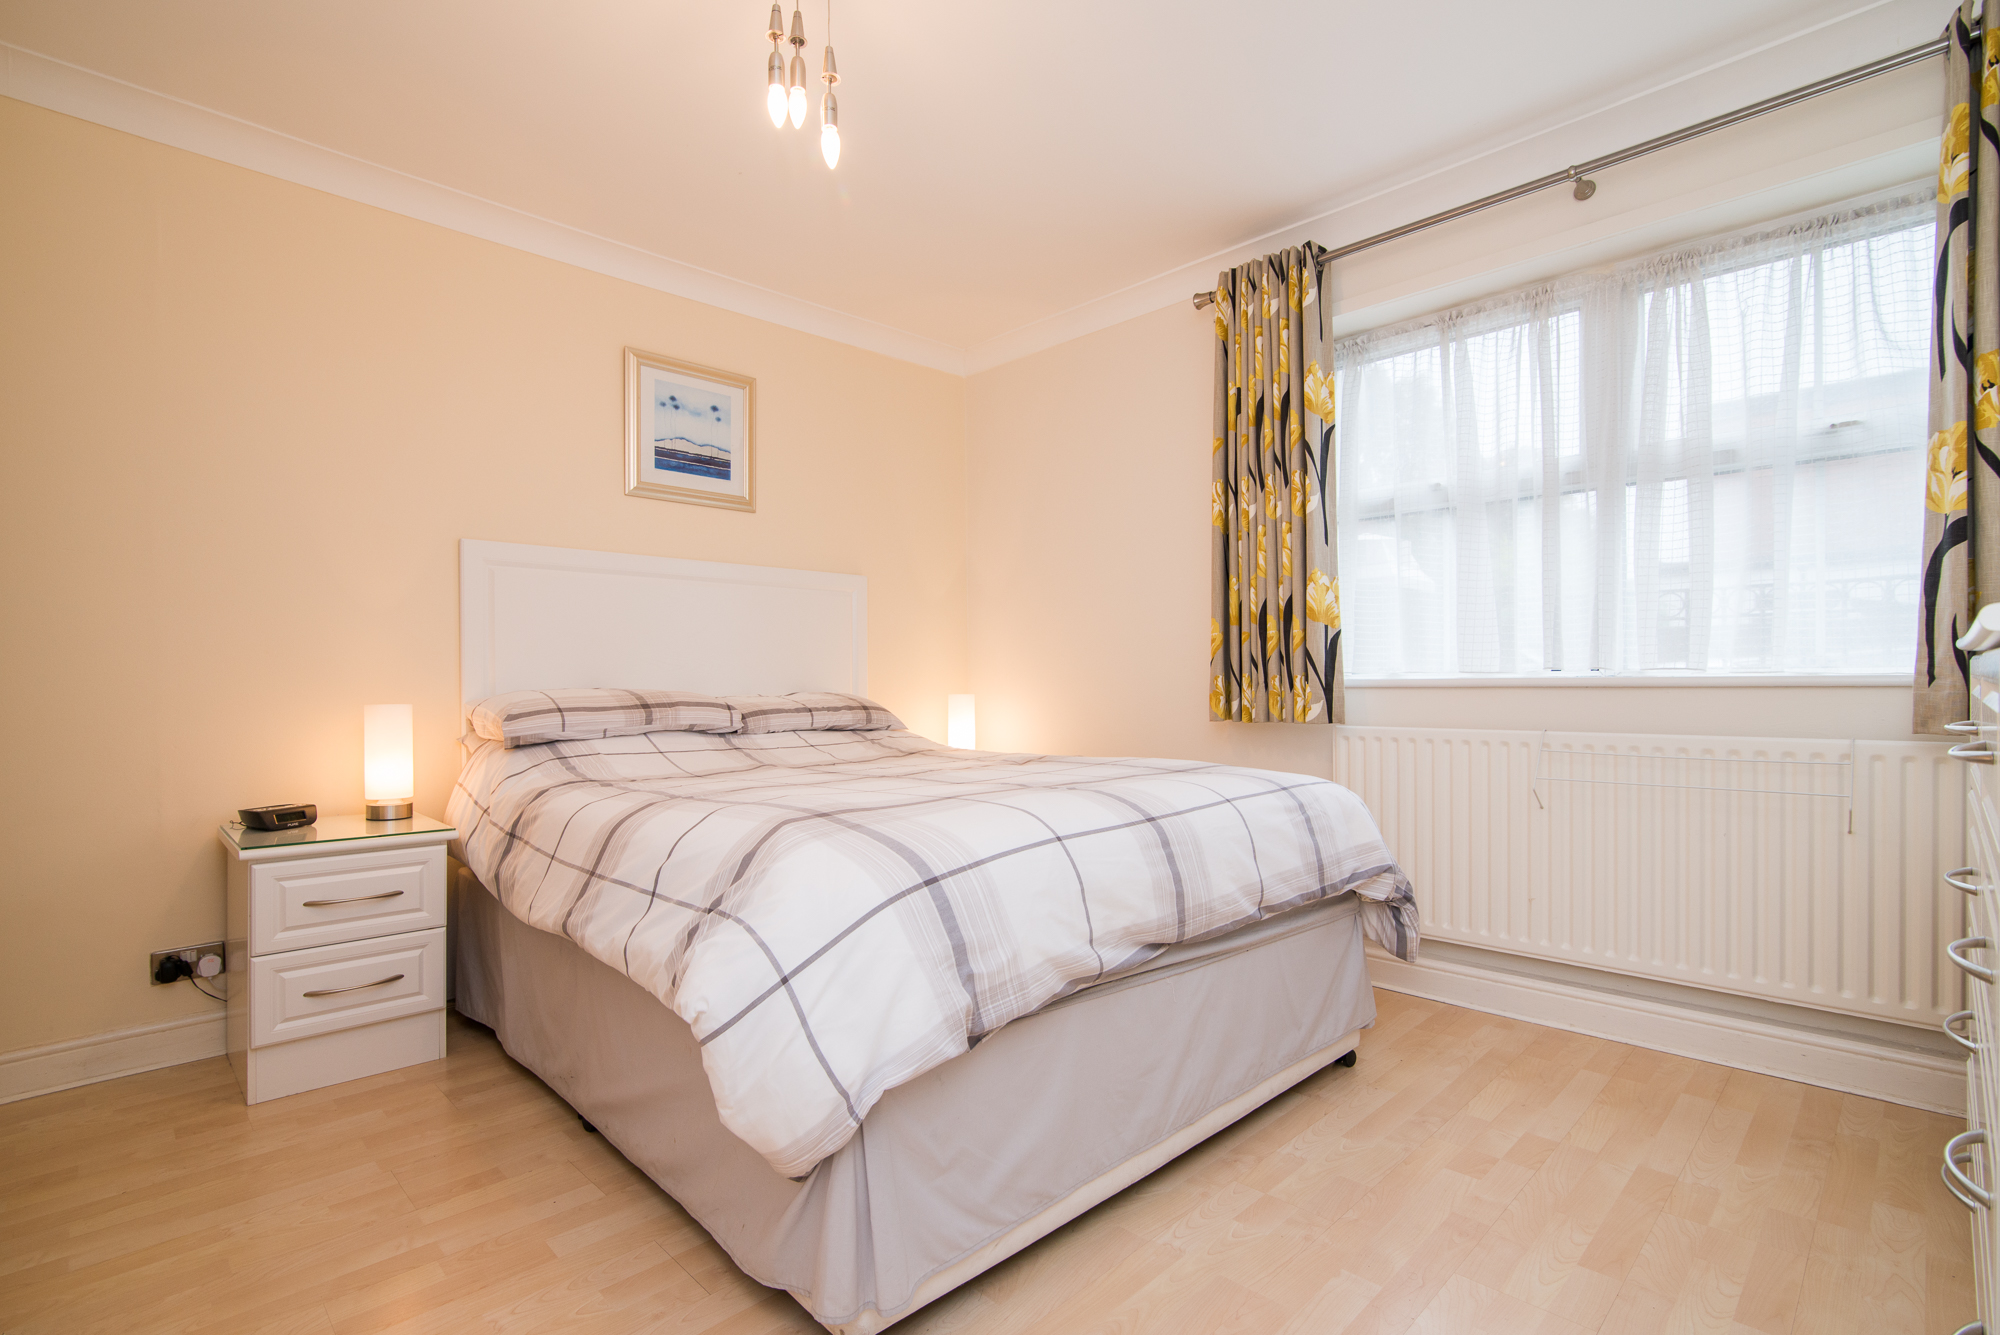 Didsbury Village Apartment Serviced Apartments - Manchester | Urban Stay